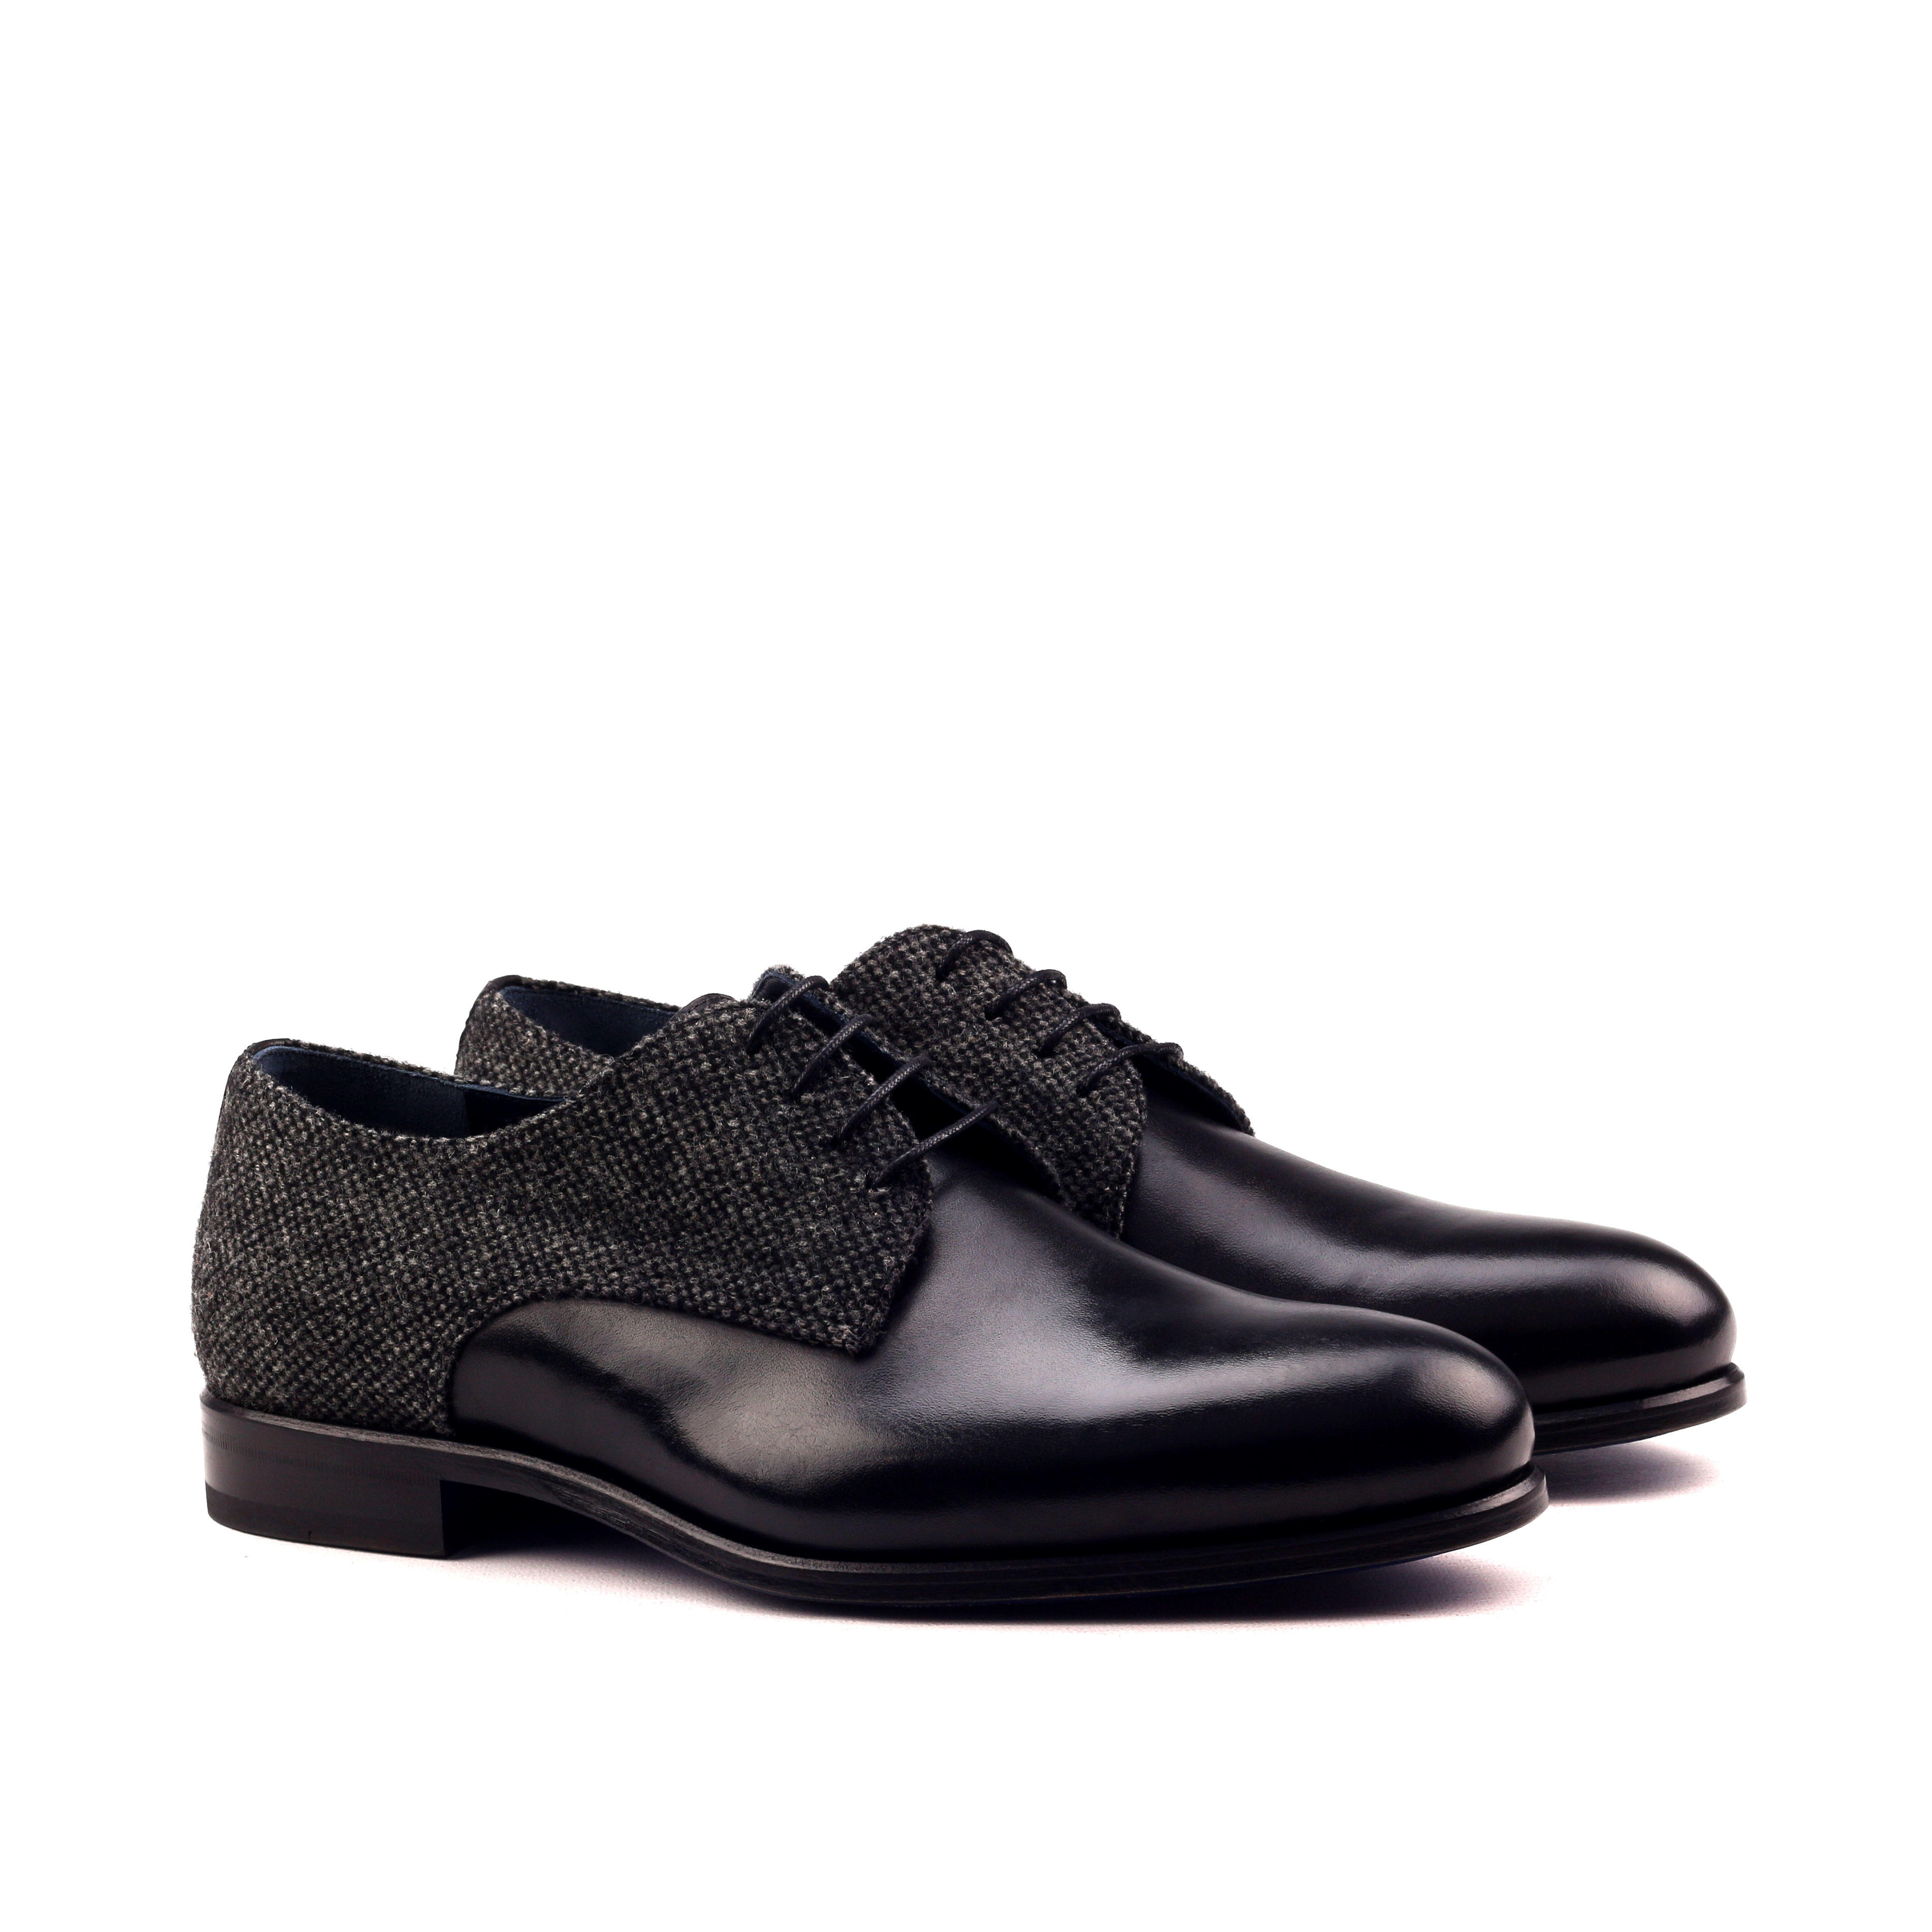 Manor of London 'The Derby' Black Calfskin & Nailhead Shoe Luxury Custom Initials Monogrammed Front Side View